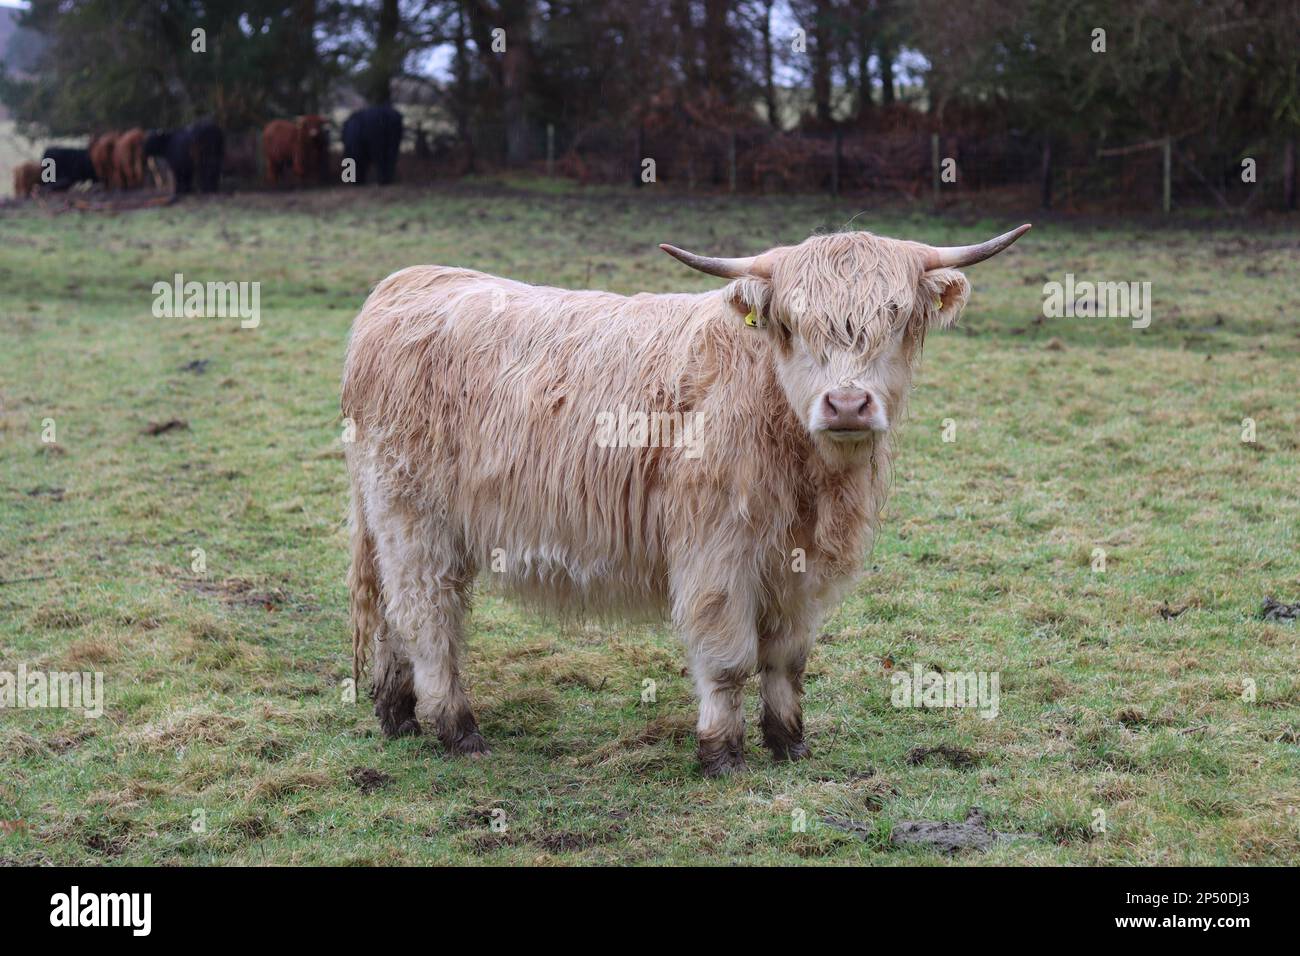 Young Highland cow with long horns standing in a field Stock Photo